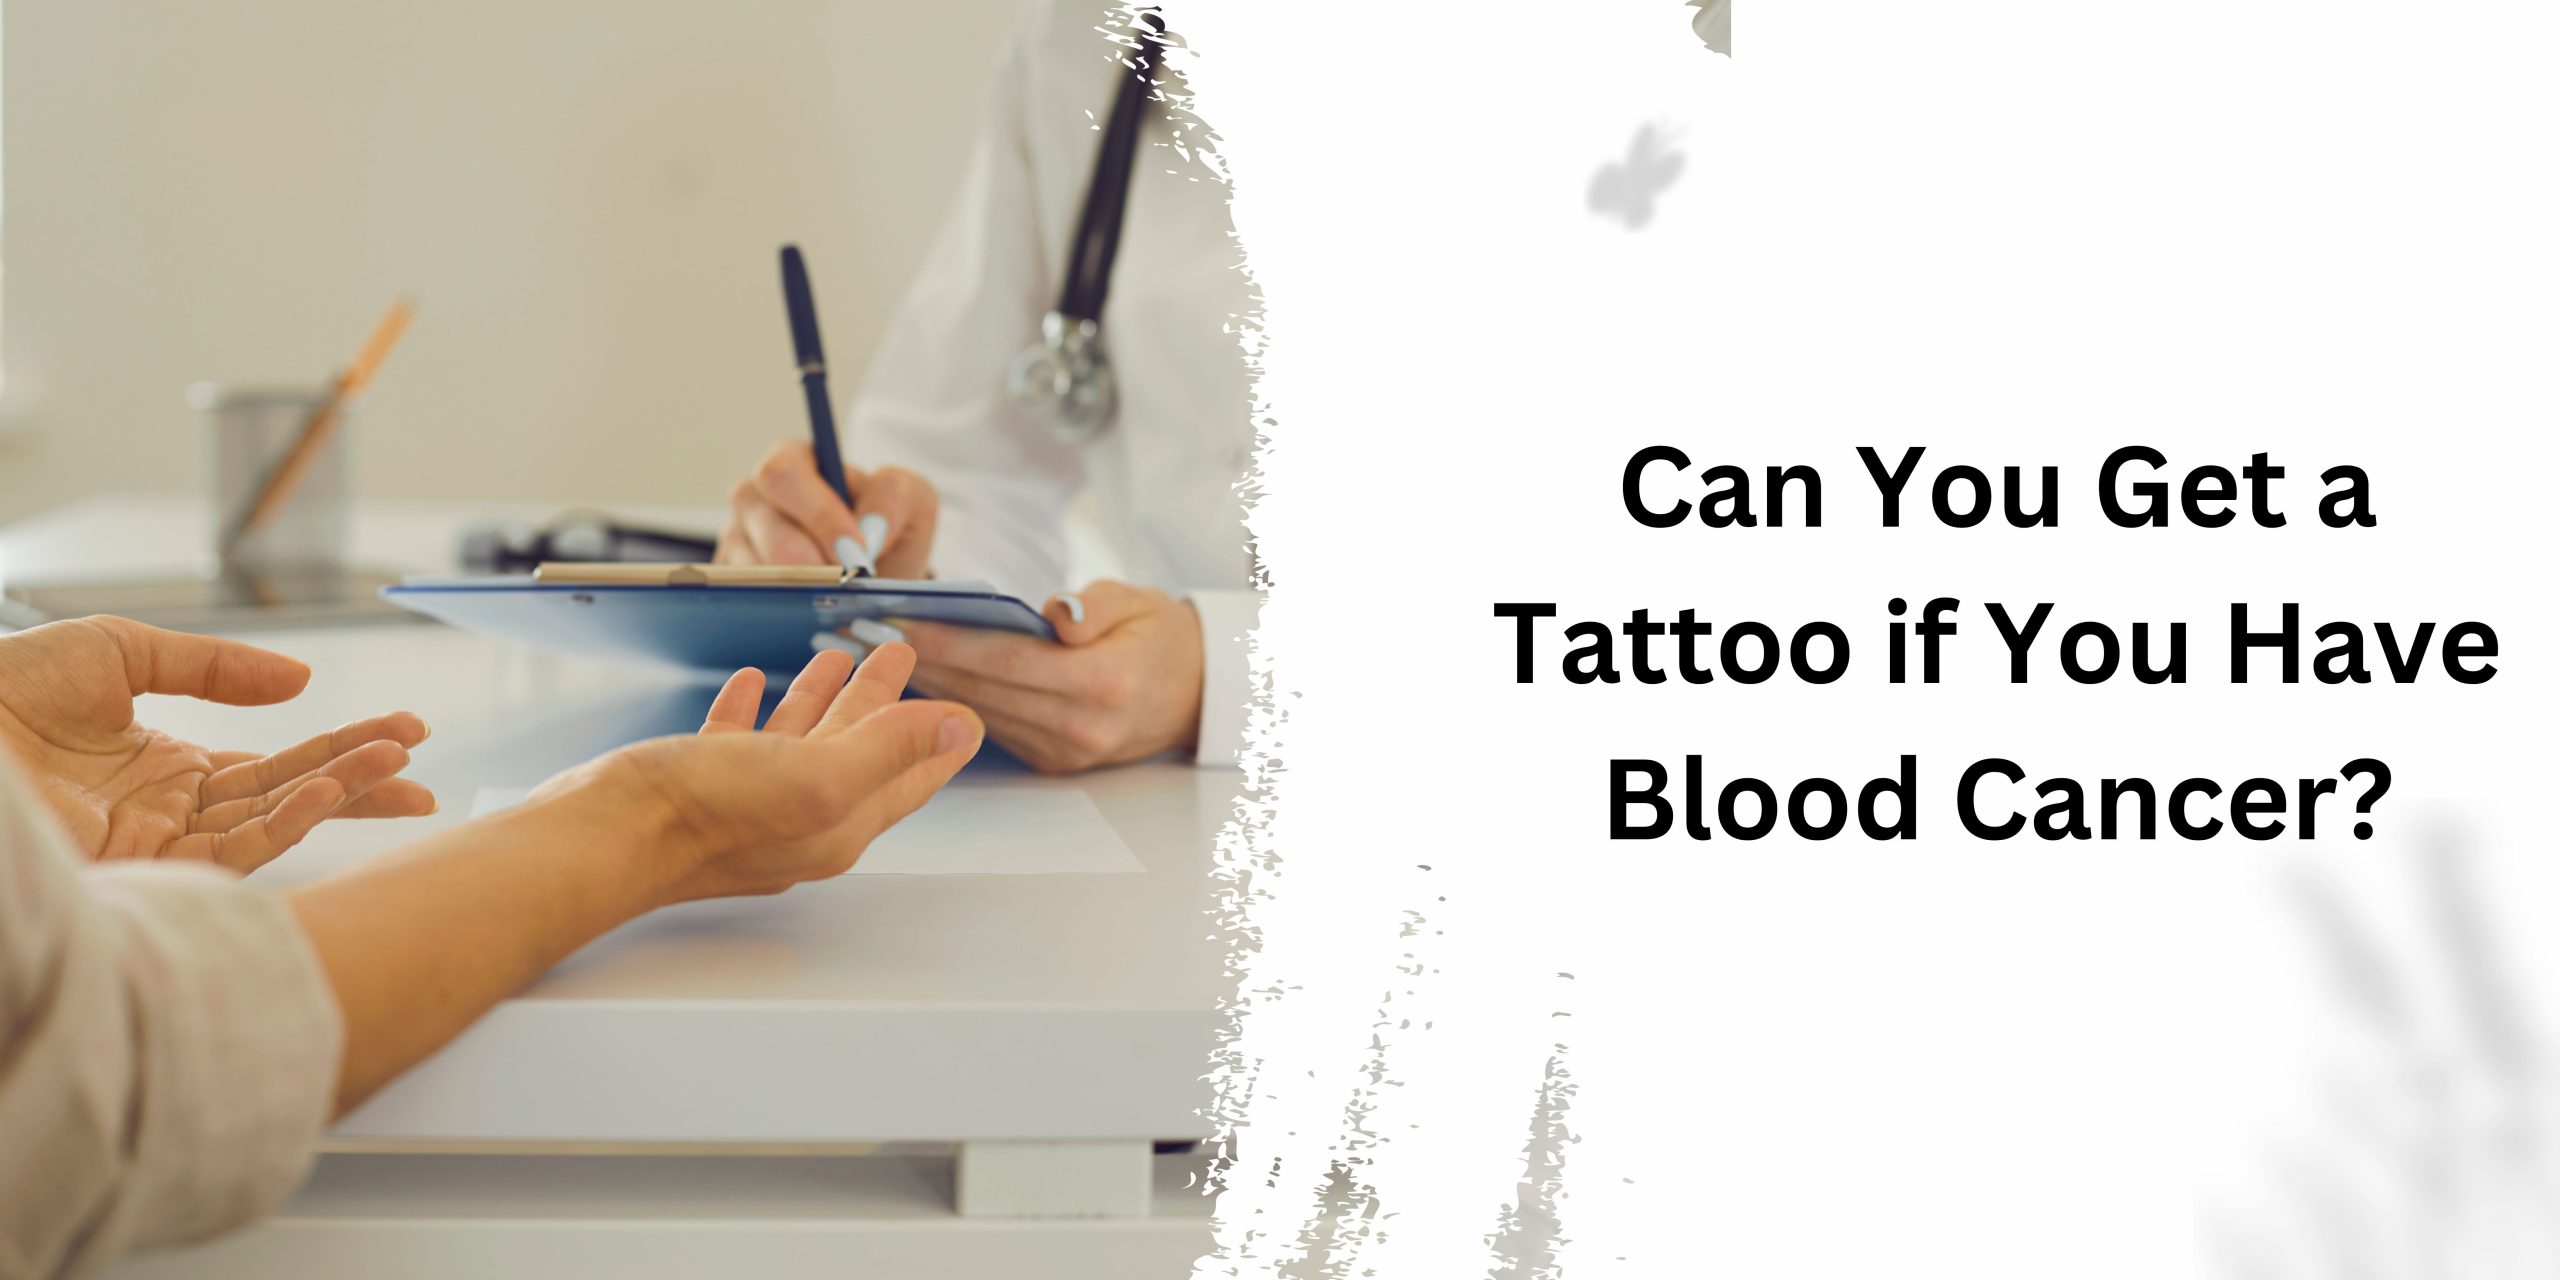 Can You Get a Tattoo if You Have Blood Cancer